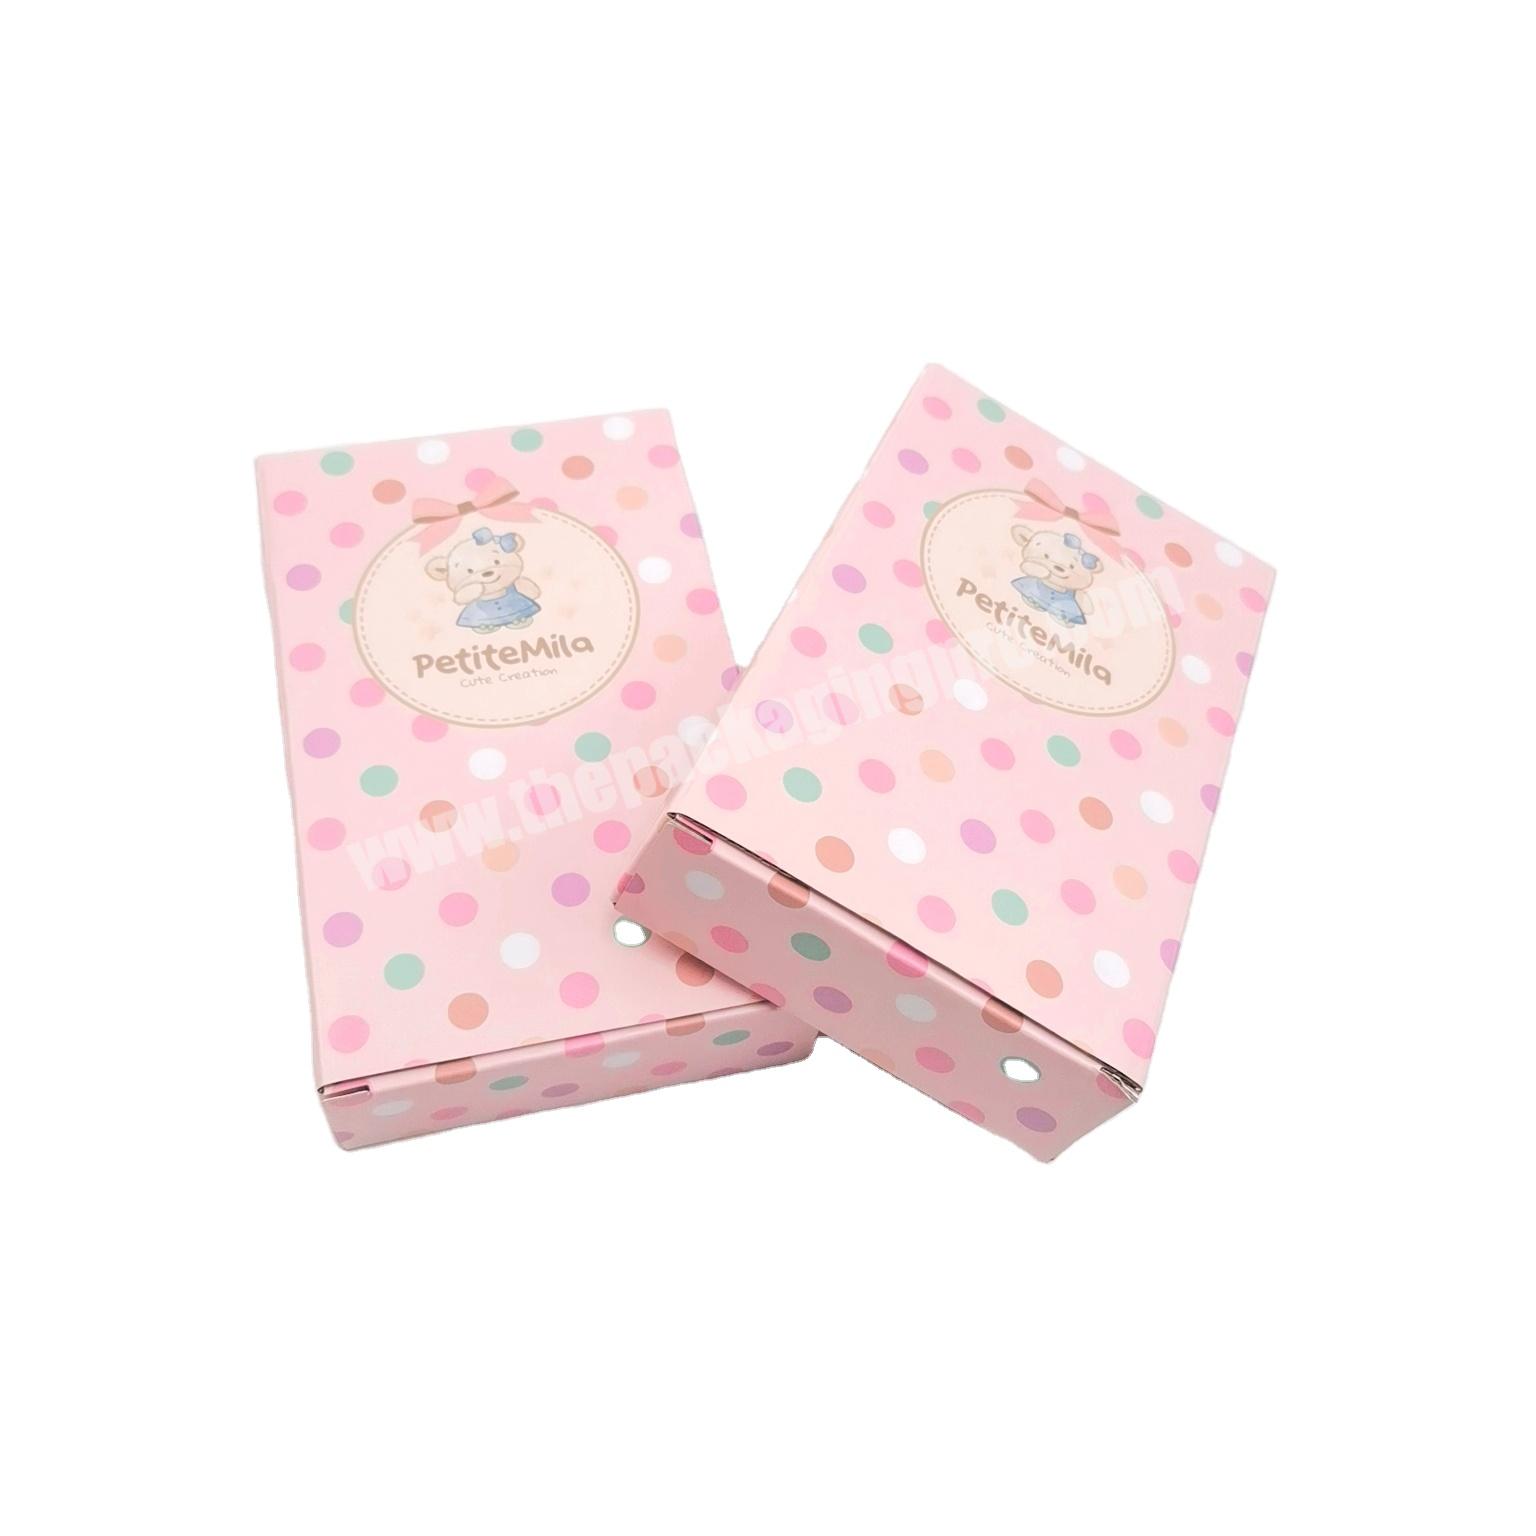 SENCAI Lovely Customized Corrugated Pink Paper Sweet Packaging Boxes For Hair Band